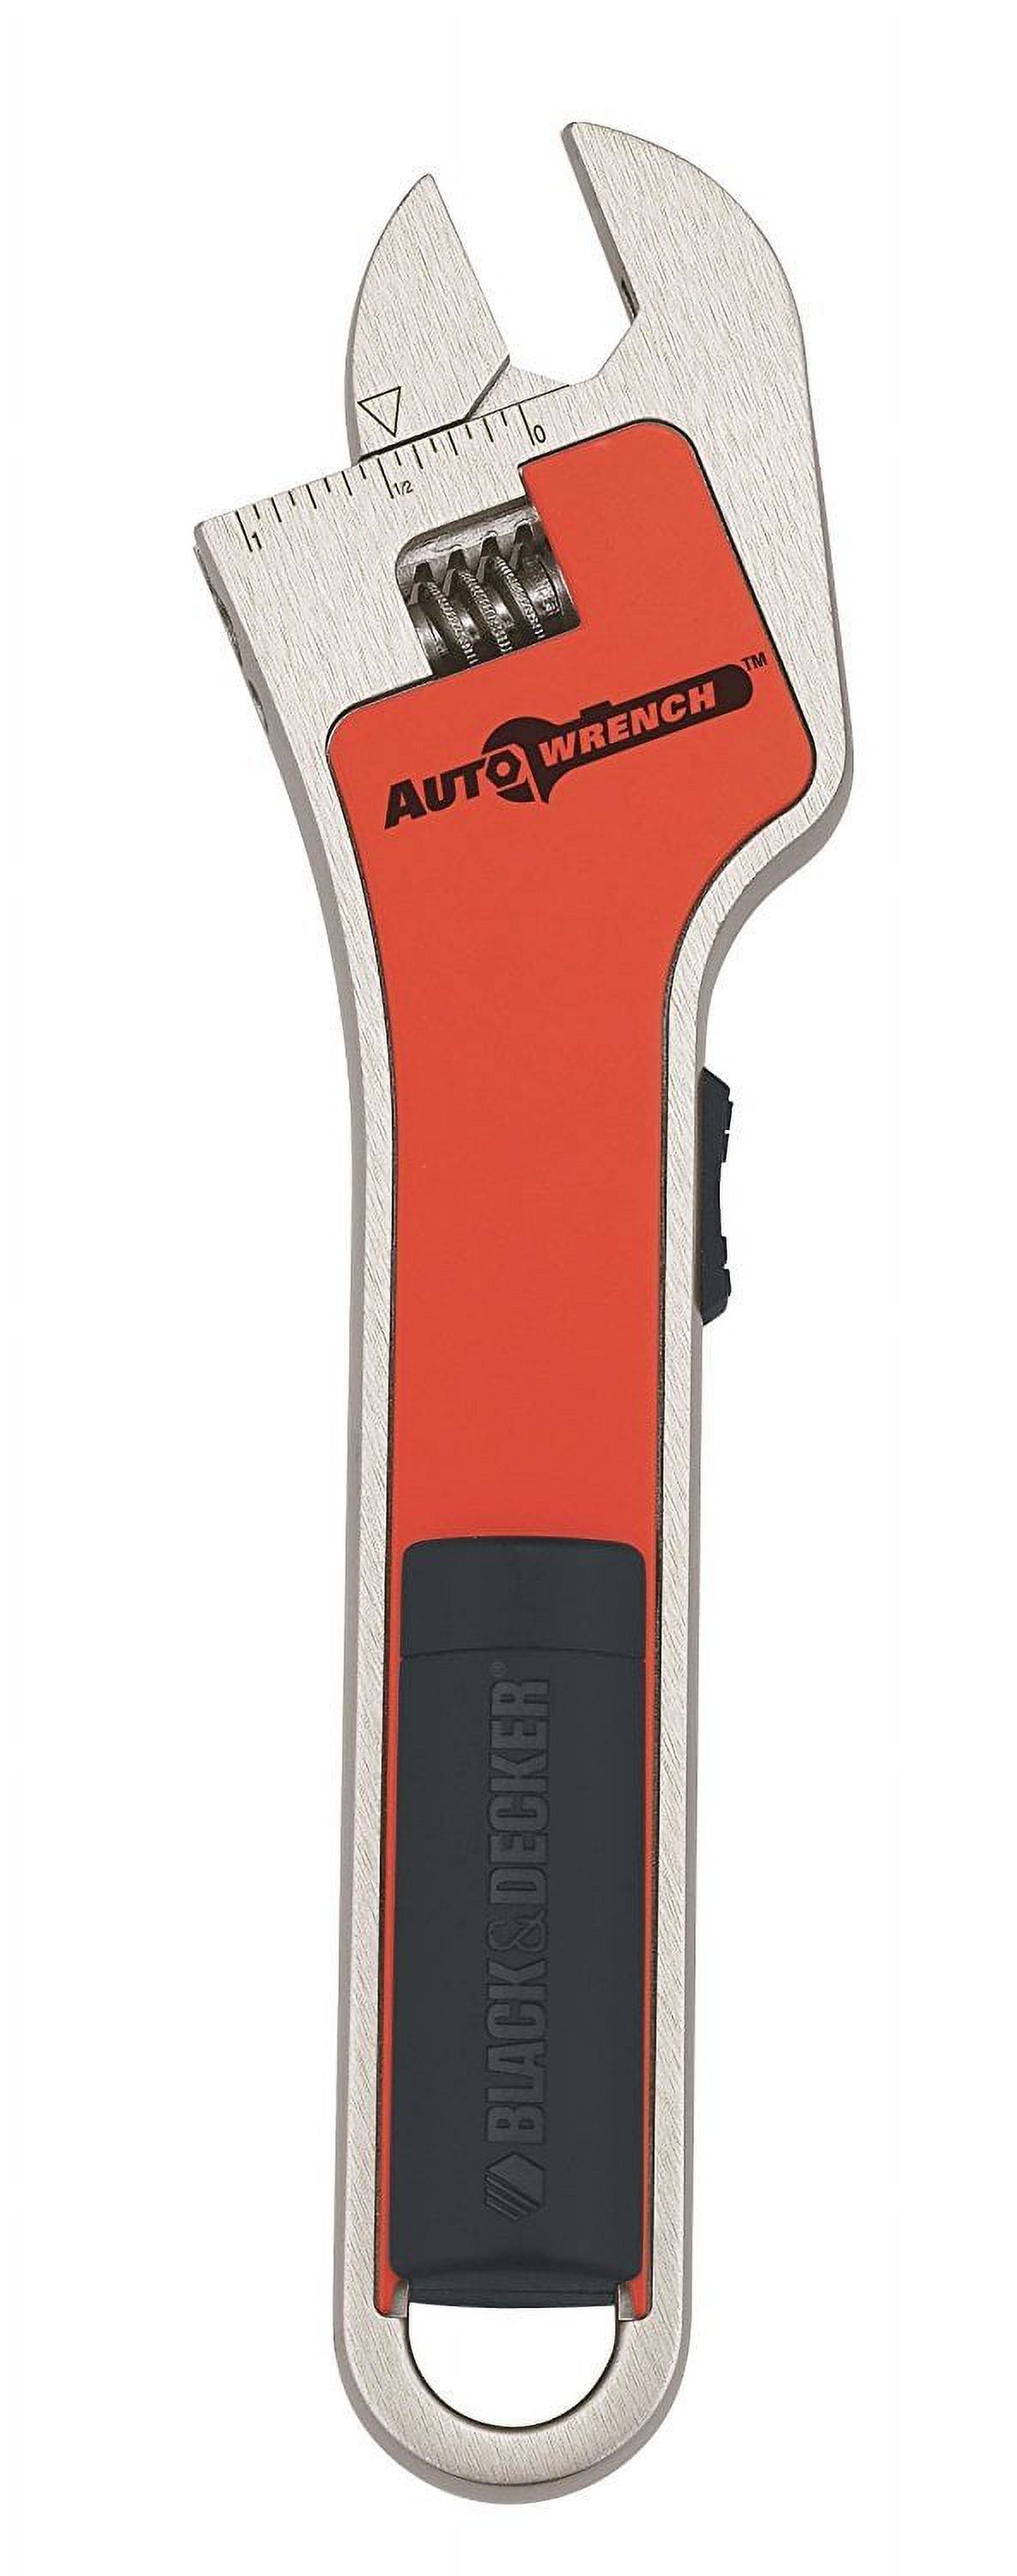 BLACK+DECKER Automatic Adjustable Wrench Tool Model AAW100 - image 1 of 13